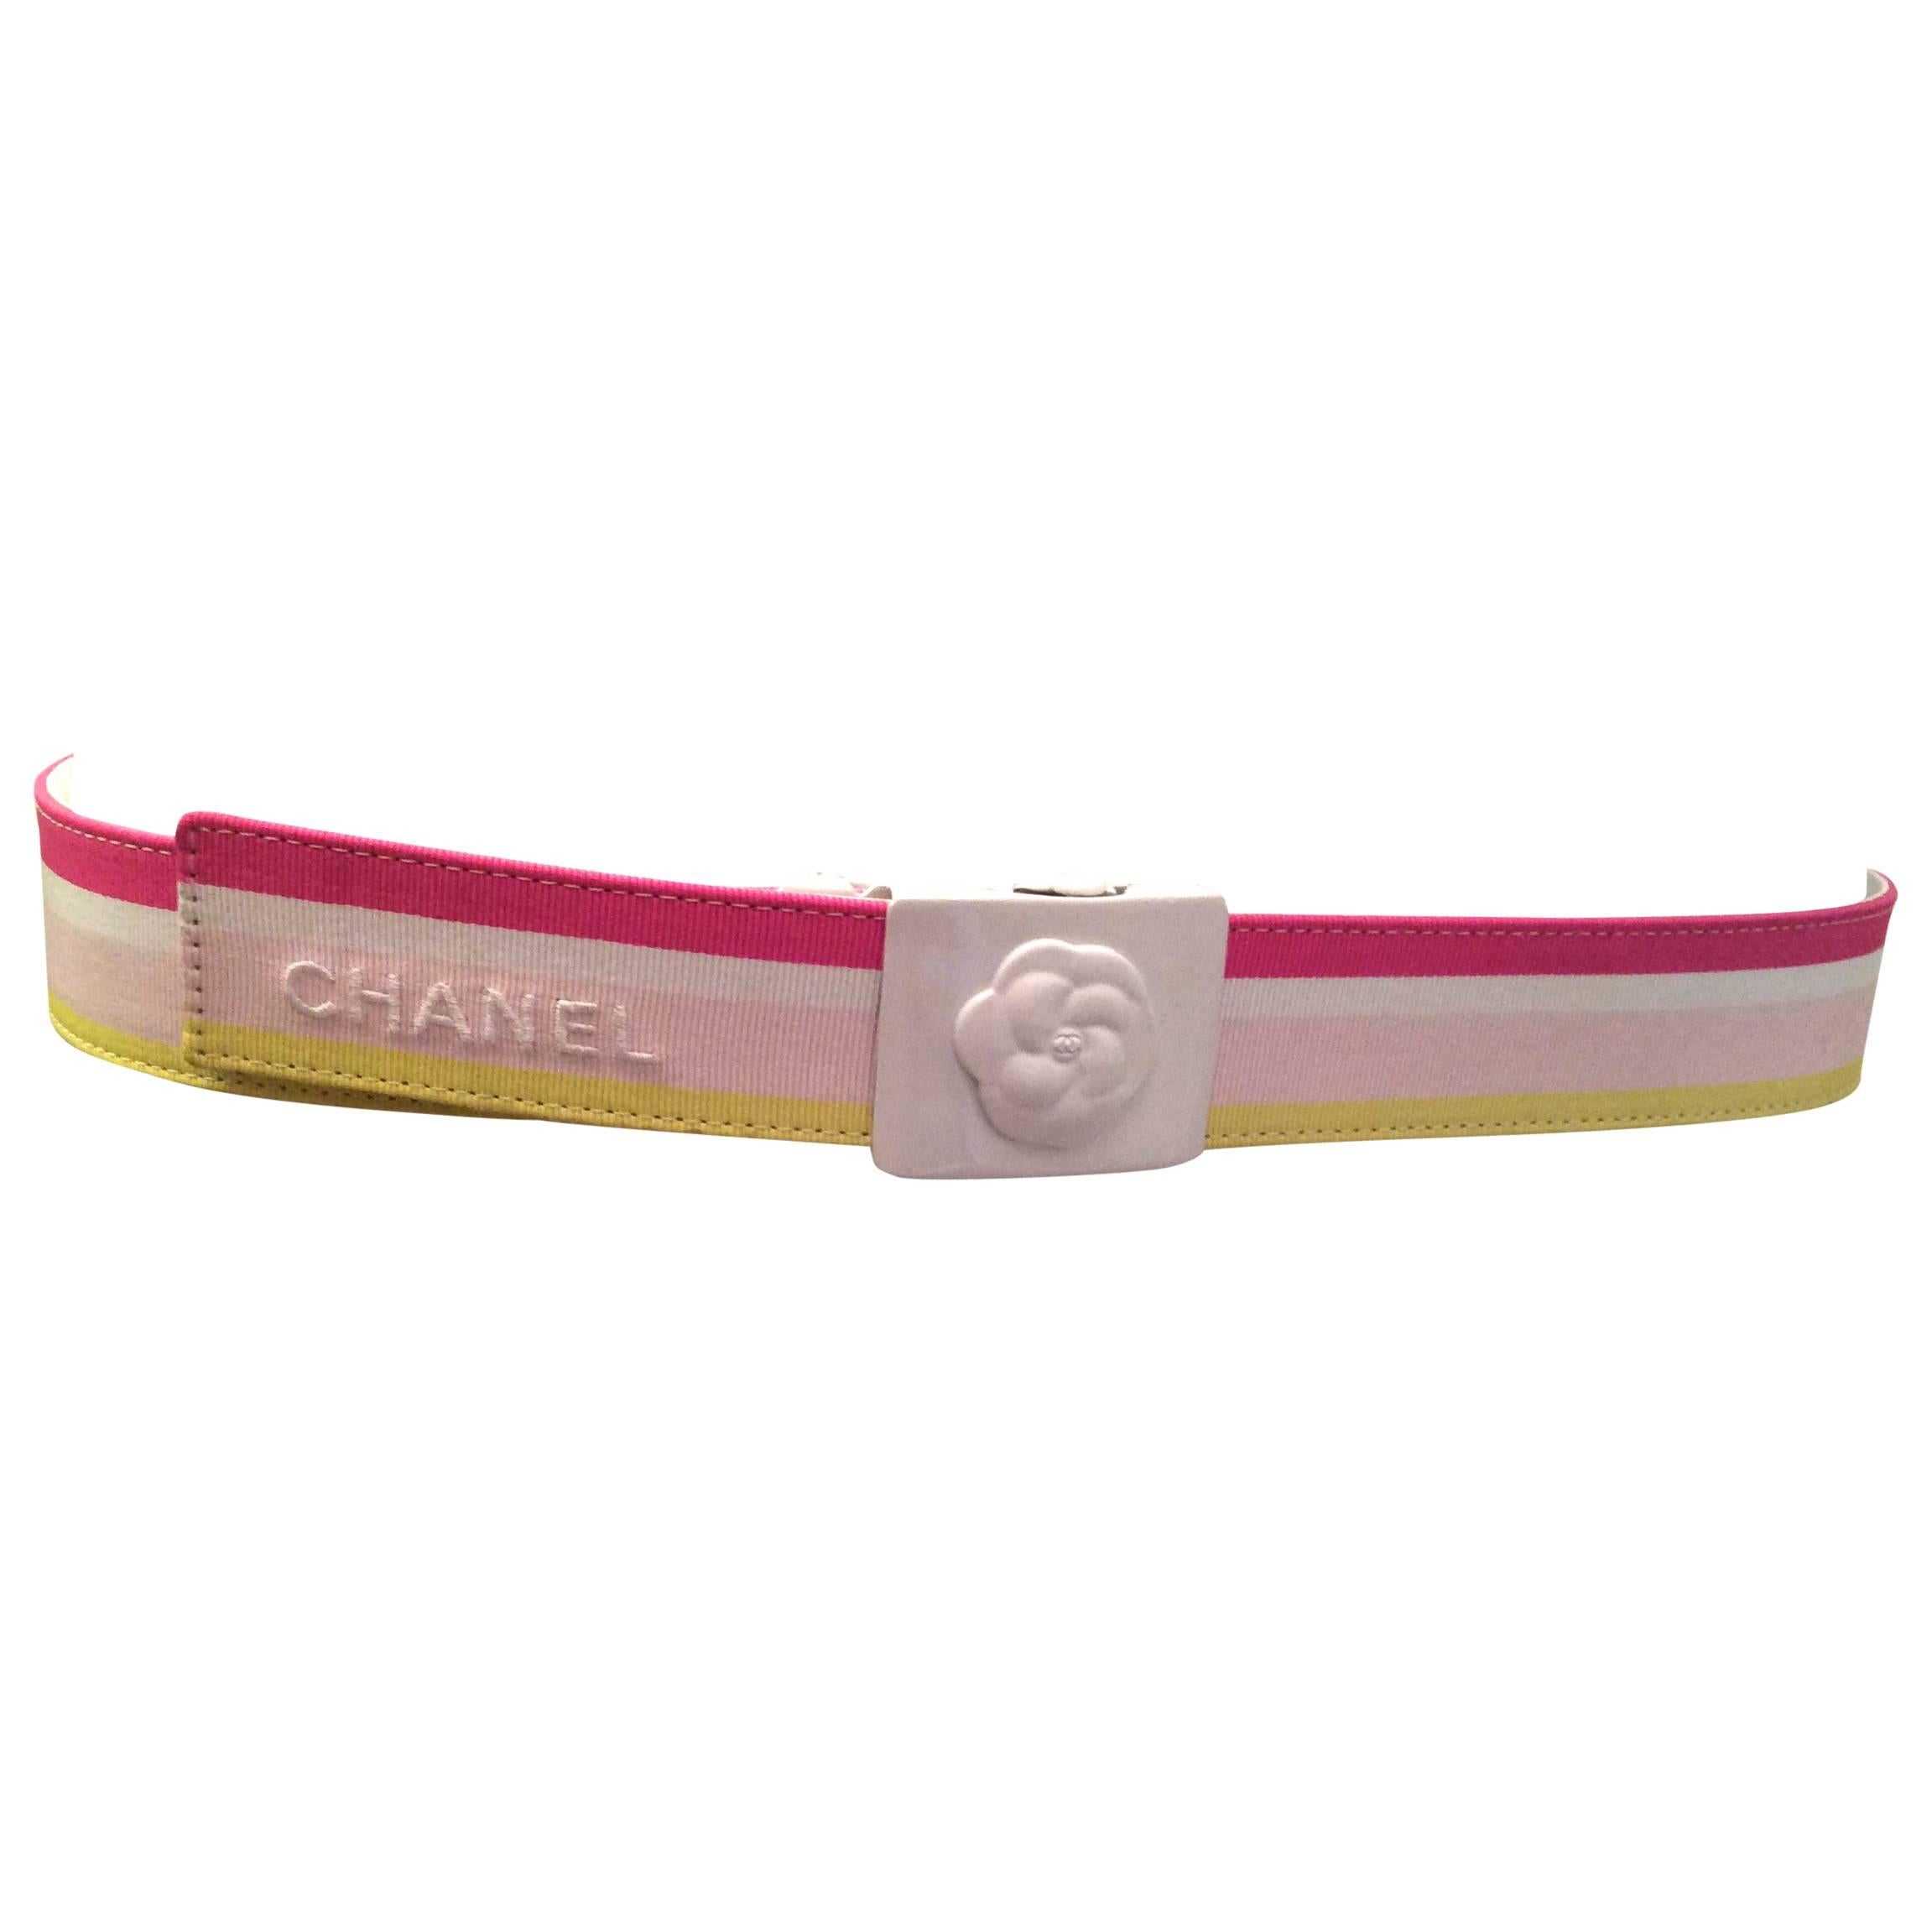 Chanel Adjustable Pink and Yellow Belt - Size 38 For Sale